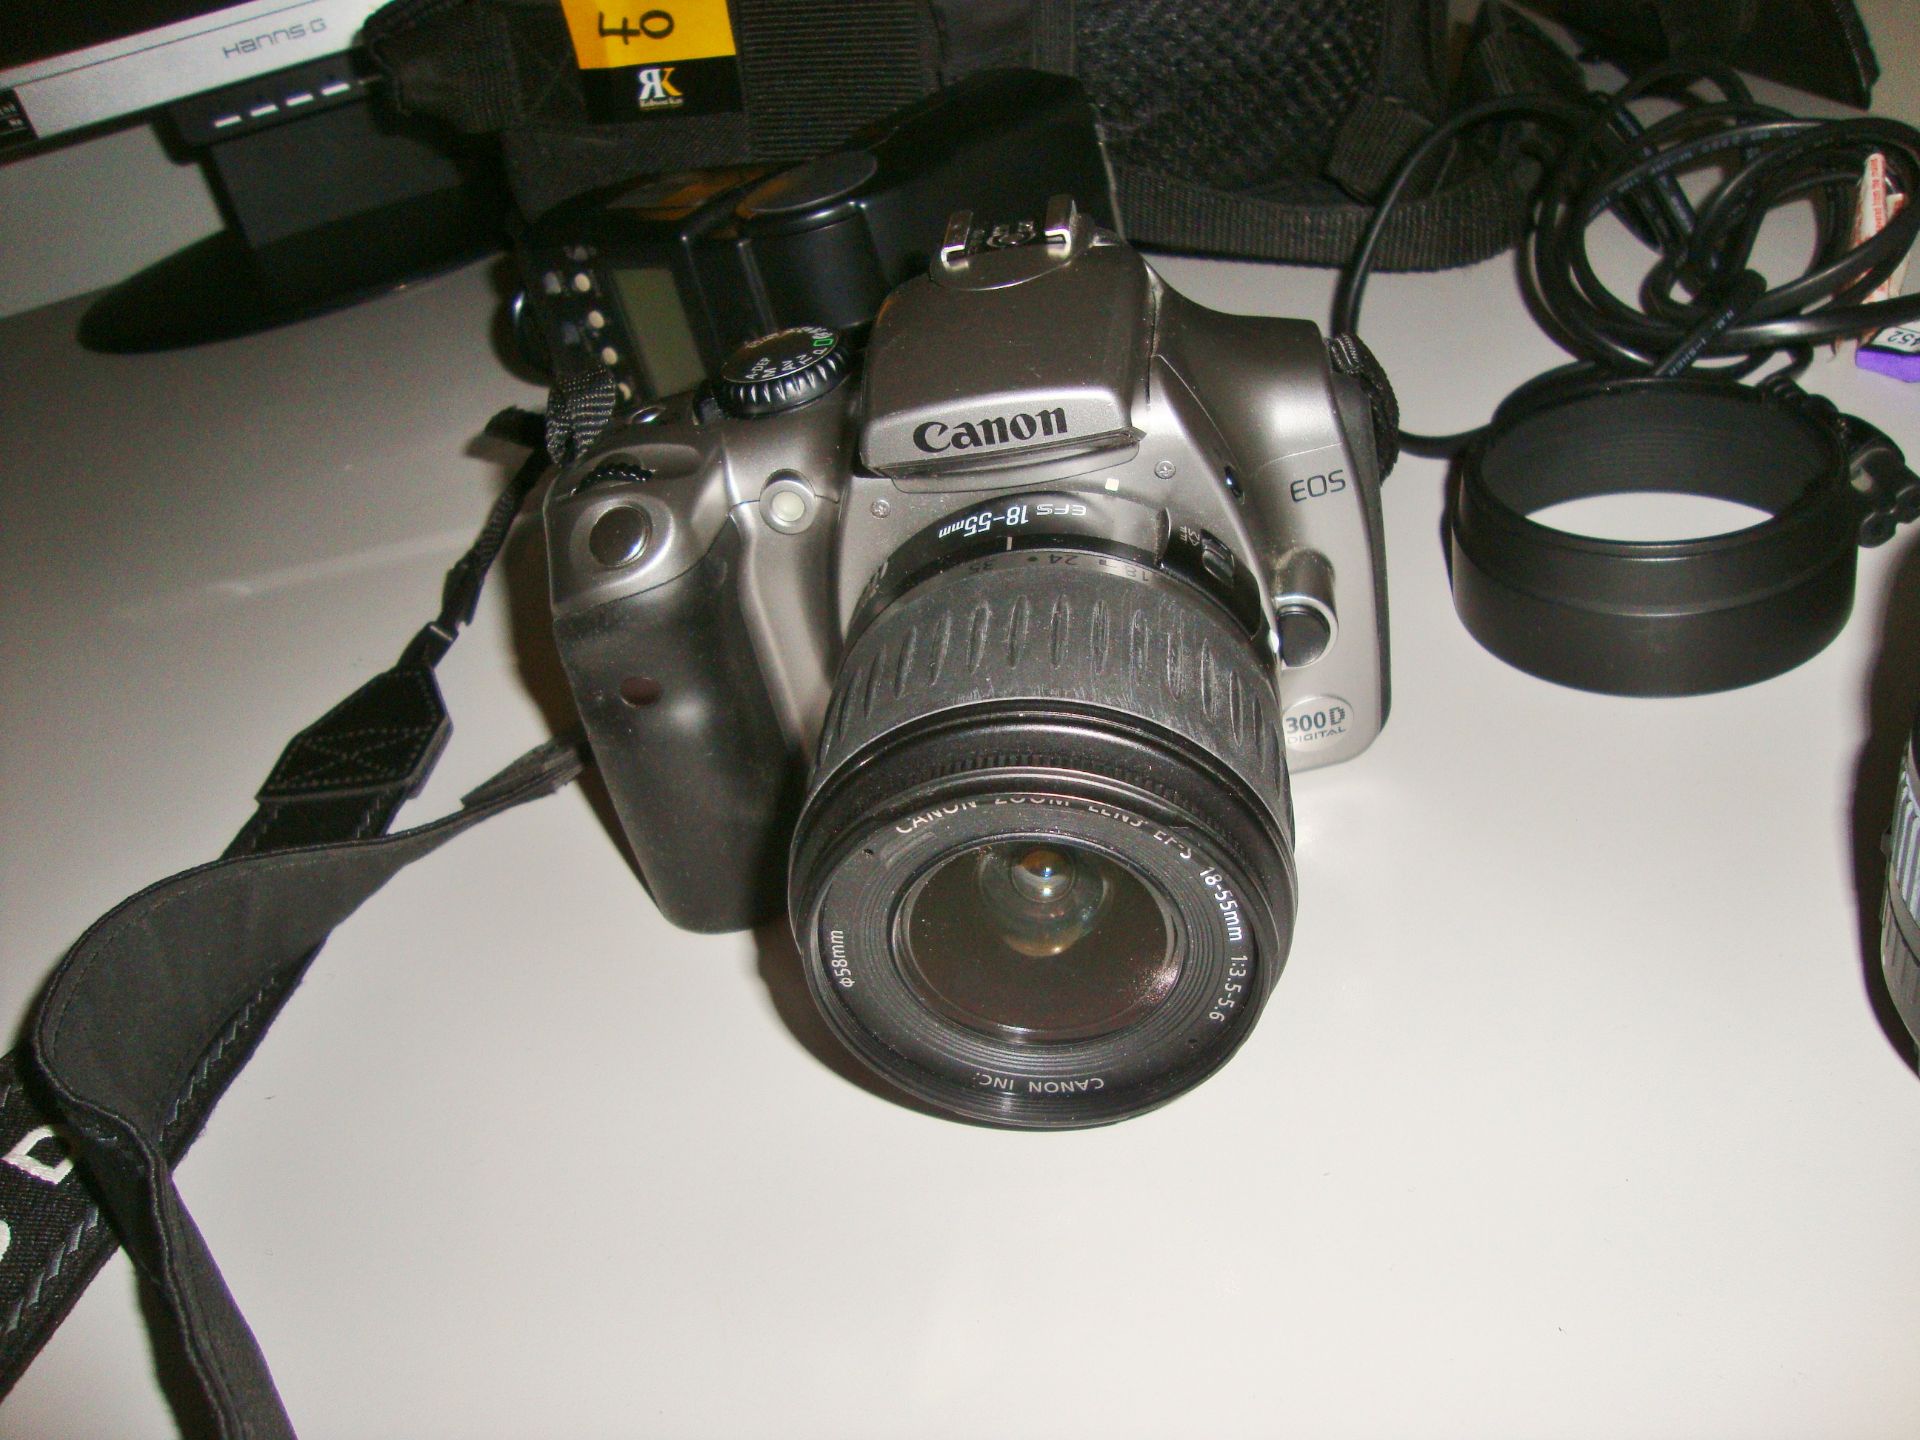 Canon 300D EOS digital SLR camera and lenses - Image 8 of 9